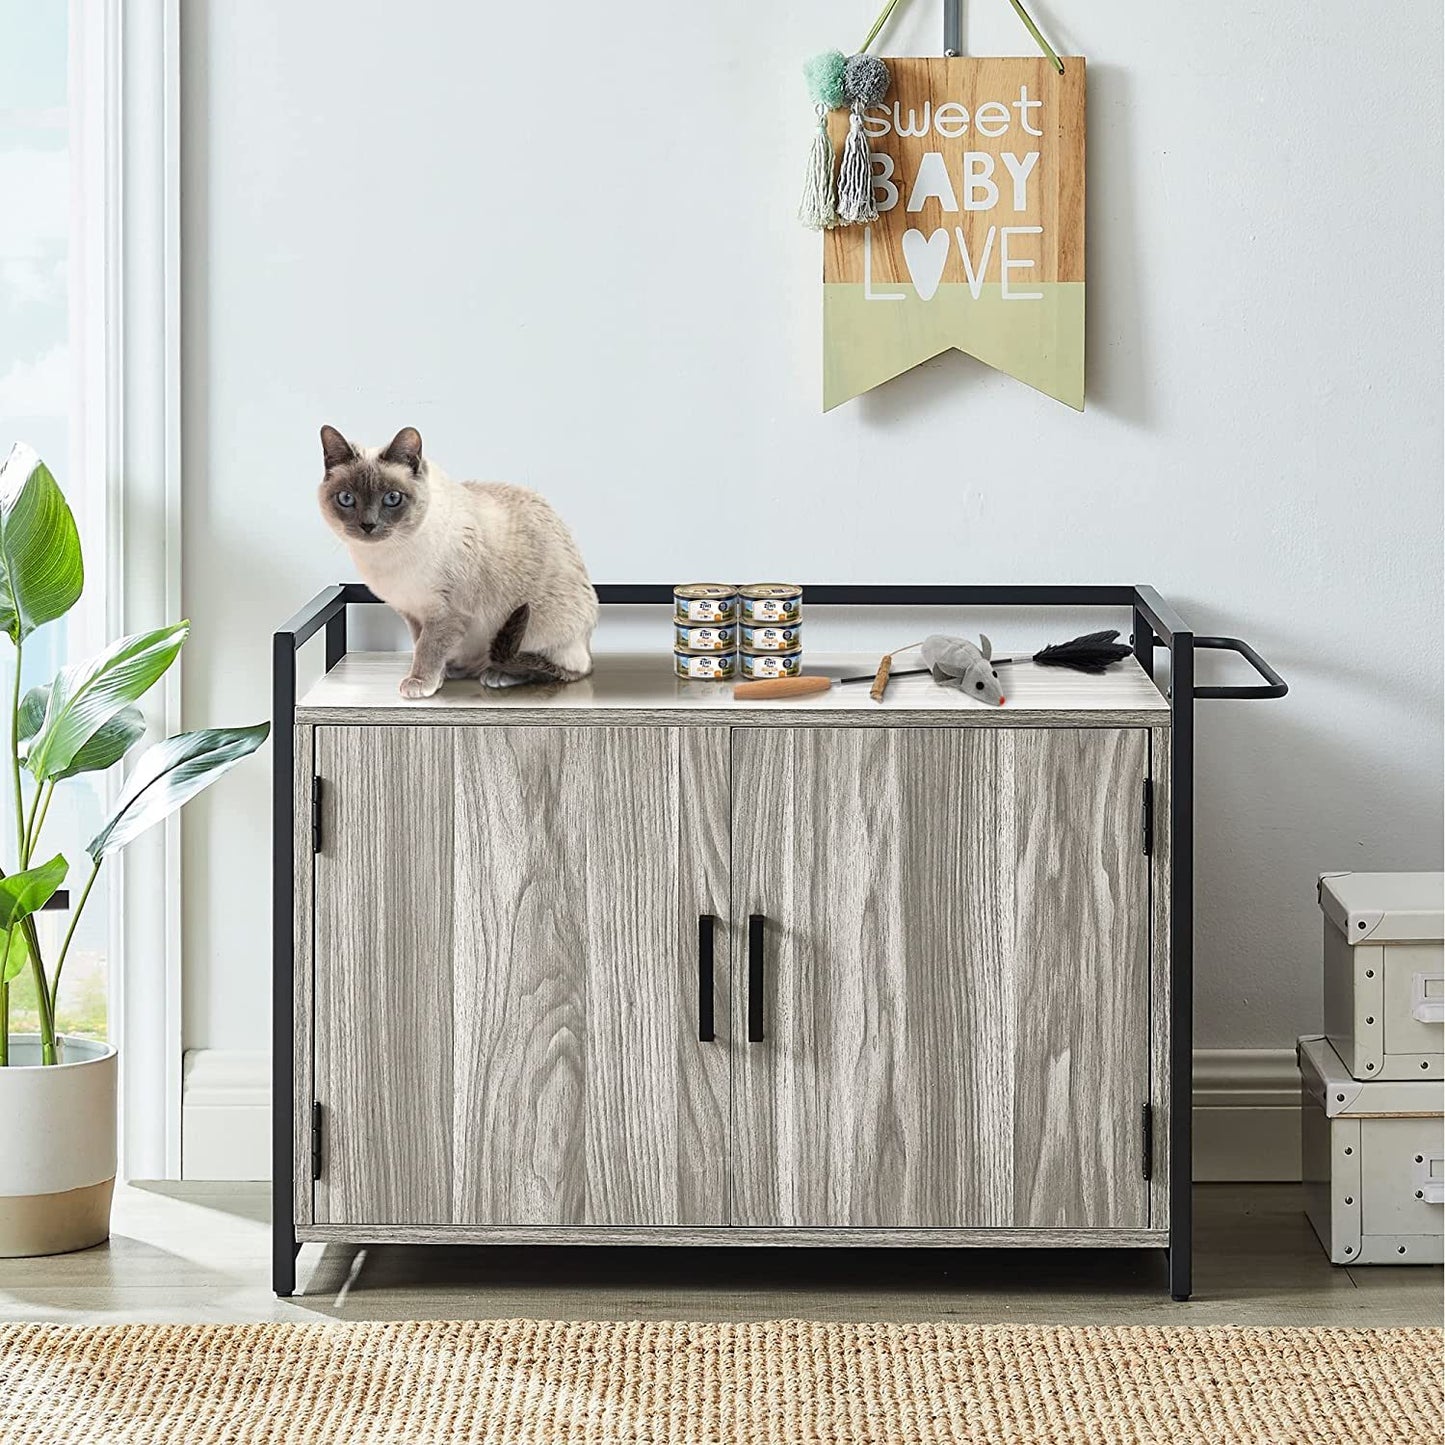 Mgaxyff Hidden Cat Litter Box Furniture with Ventilation and Bench Seat, Pet Crate with Iron and Wood Sturdy Structure